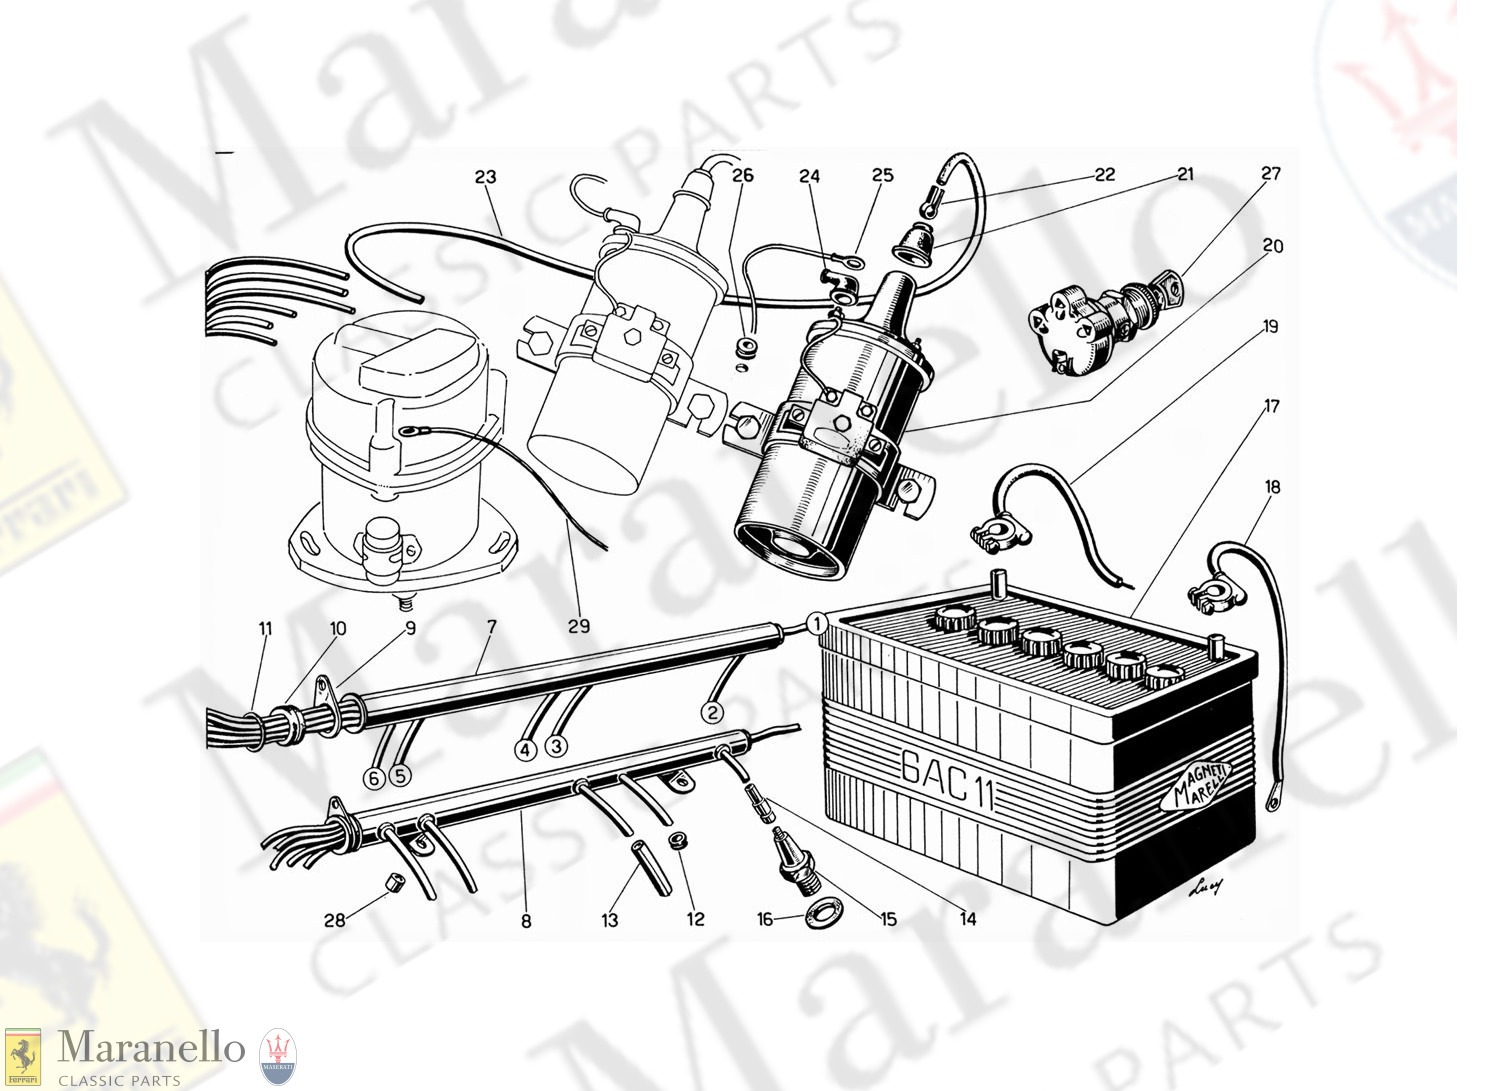 014 Wiring Ignition Coils And Battery Parts Diagram For Ferrari 330 Gt 2 2 Mk 1 Maranello Classic Parts